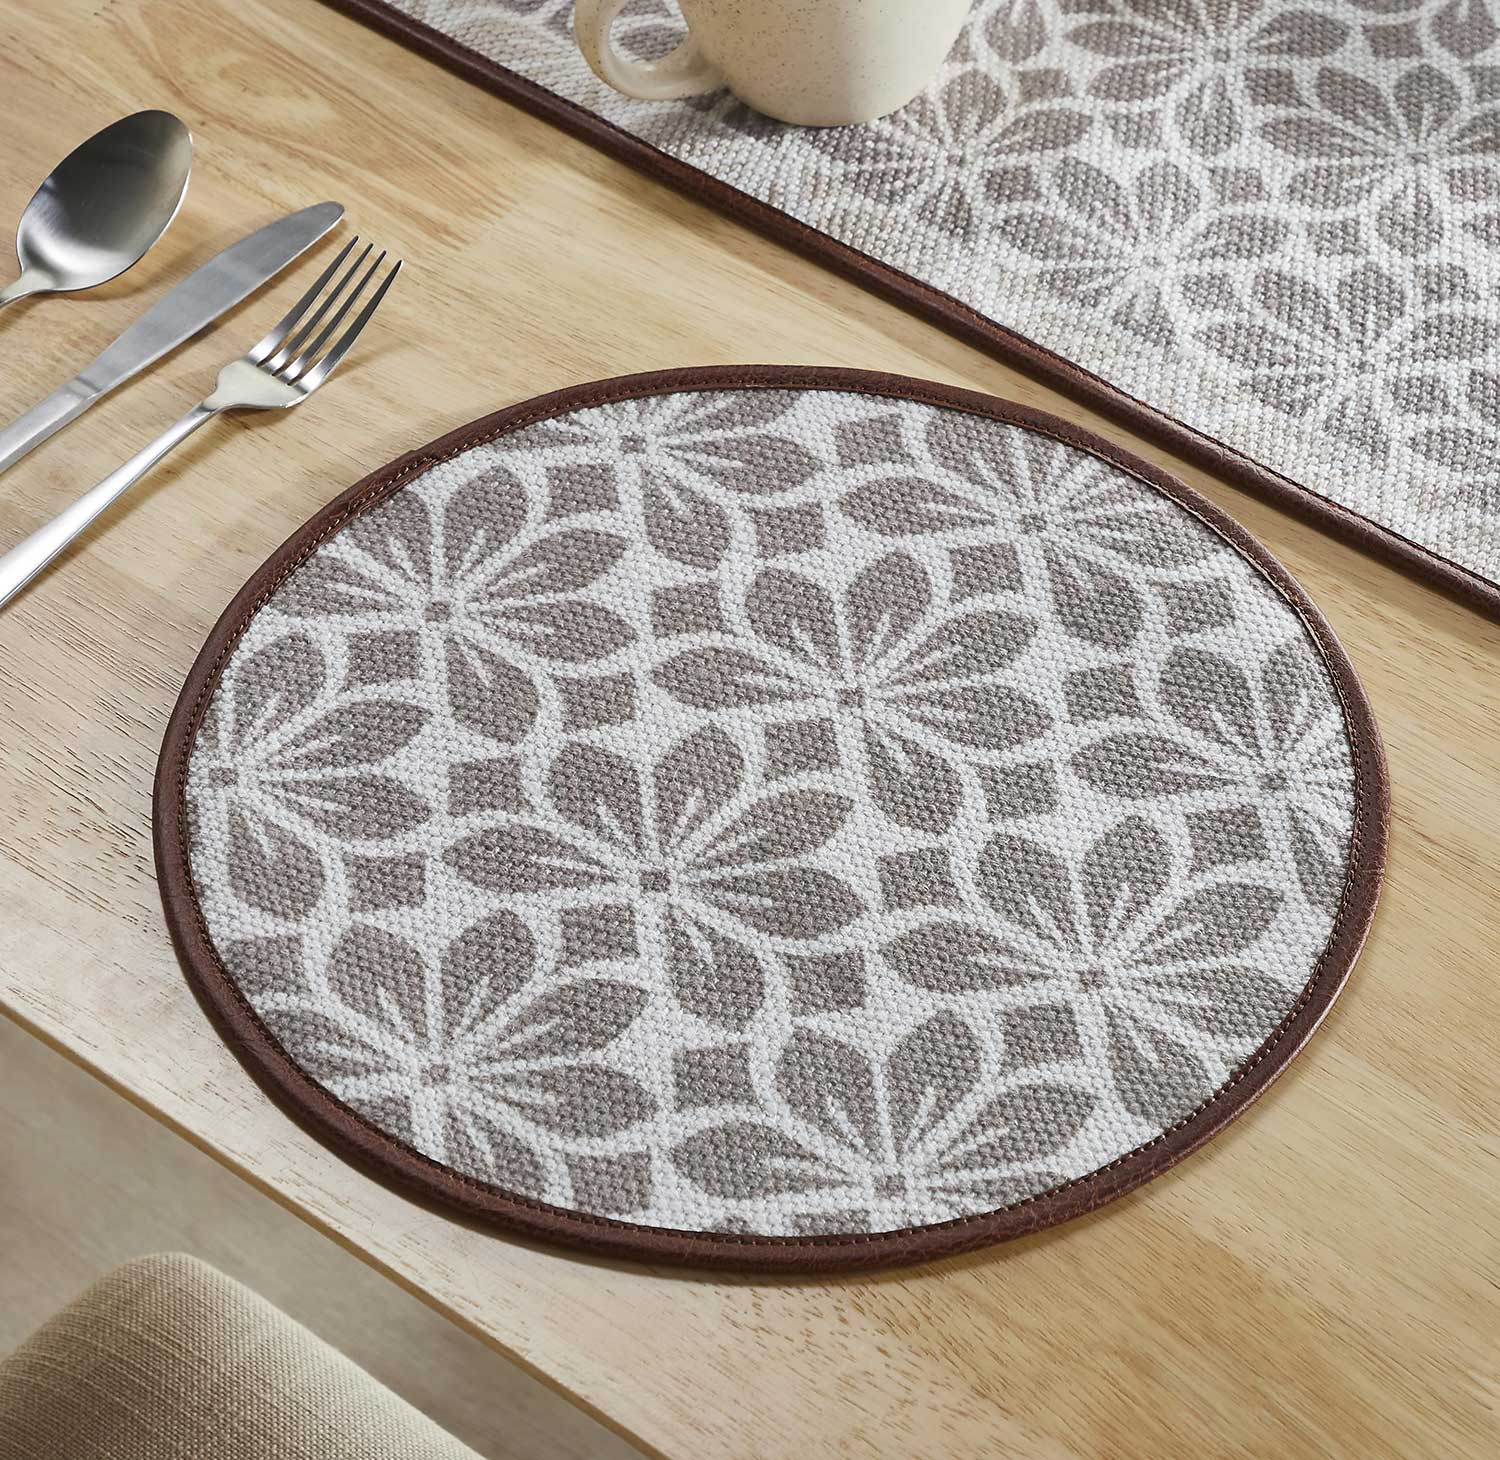 Mona B Set of 2 Printed Placemats, 13 INCH Round, Best for Bed-Side Table/Center Table, Dining Table/Shelves - PP-114 - Placemat by Mona-B - Shop1999, Shop2999, Shop3999